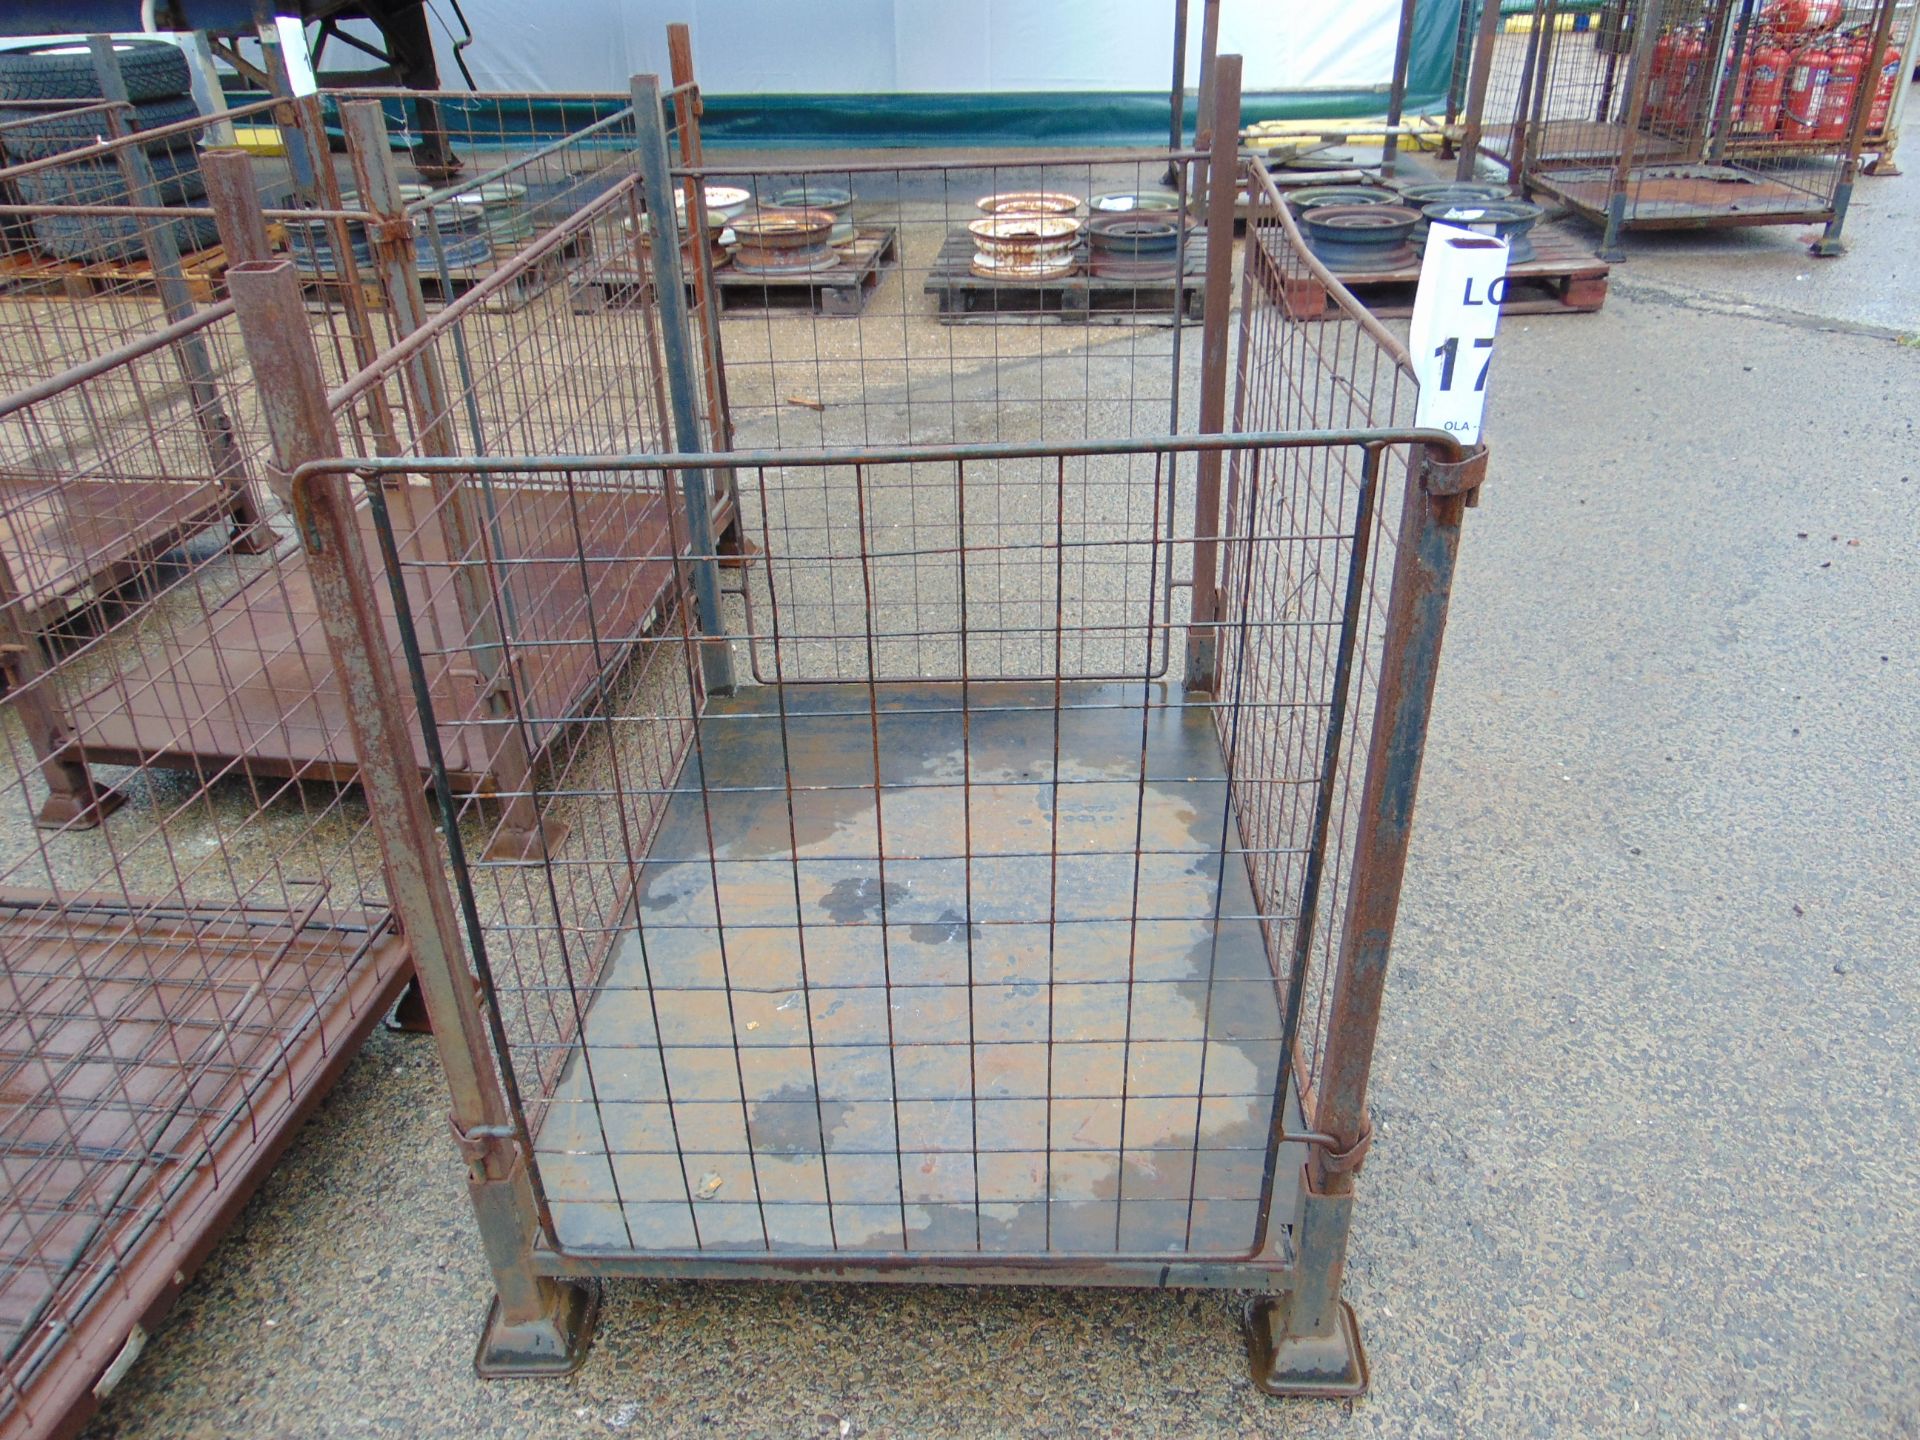 1 x STEEL STACKING STILLAGE, WITH REMOVABLE SIDES AND CORNER POSTS - Image 2 of 2